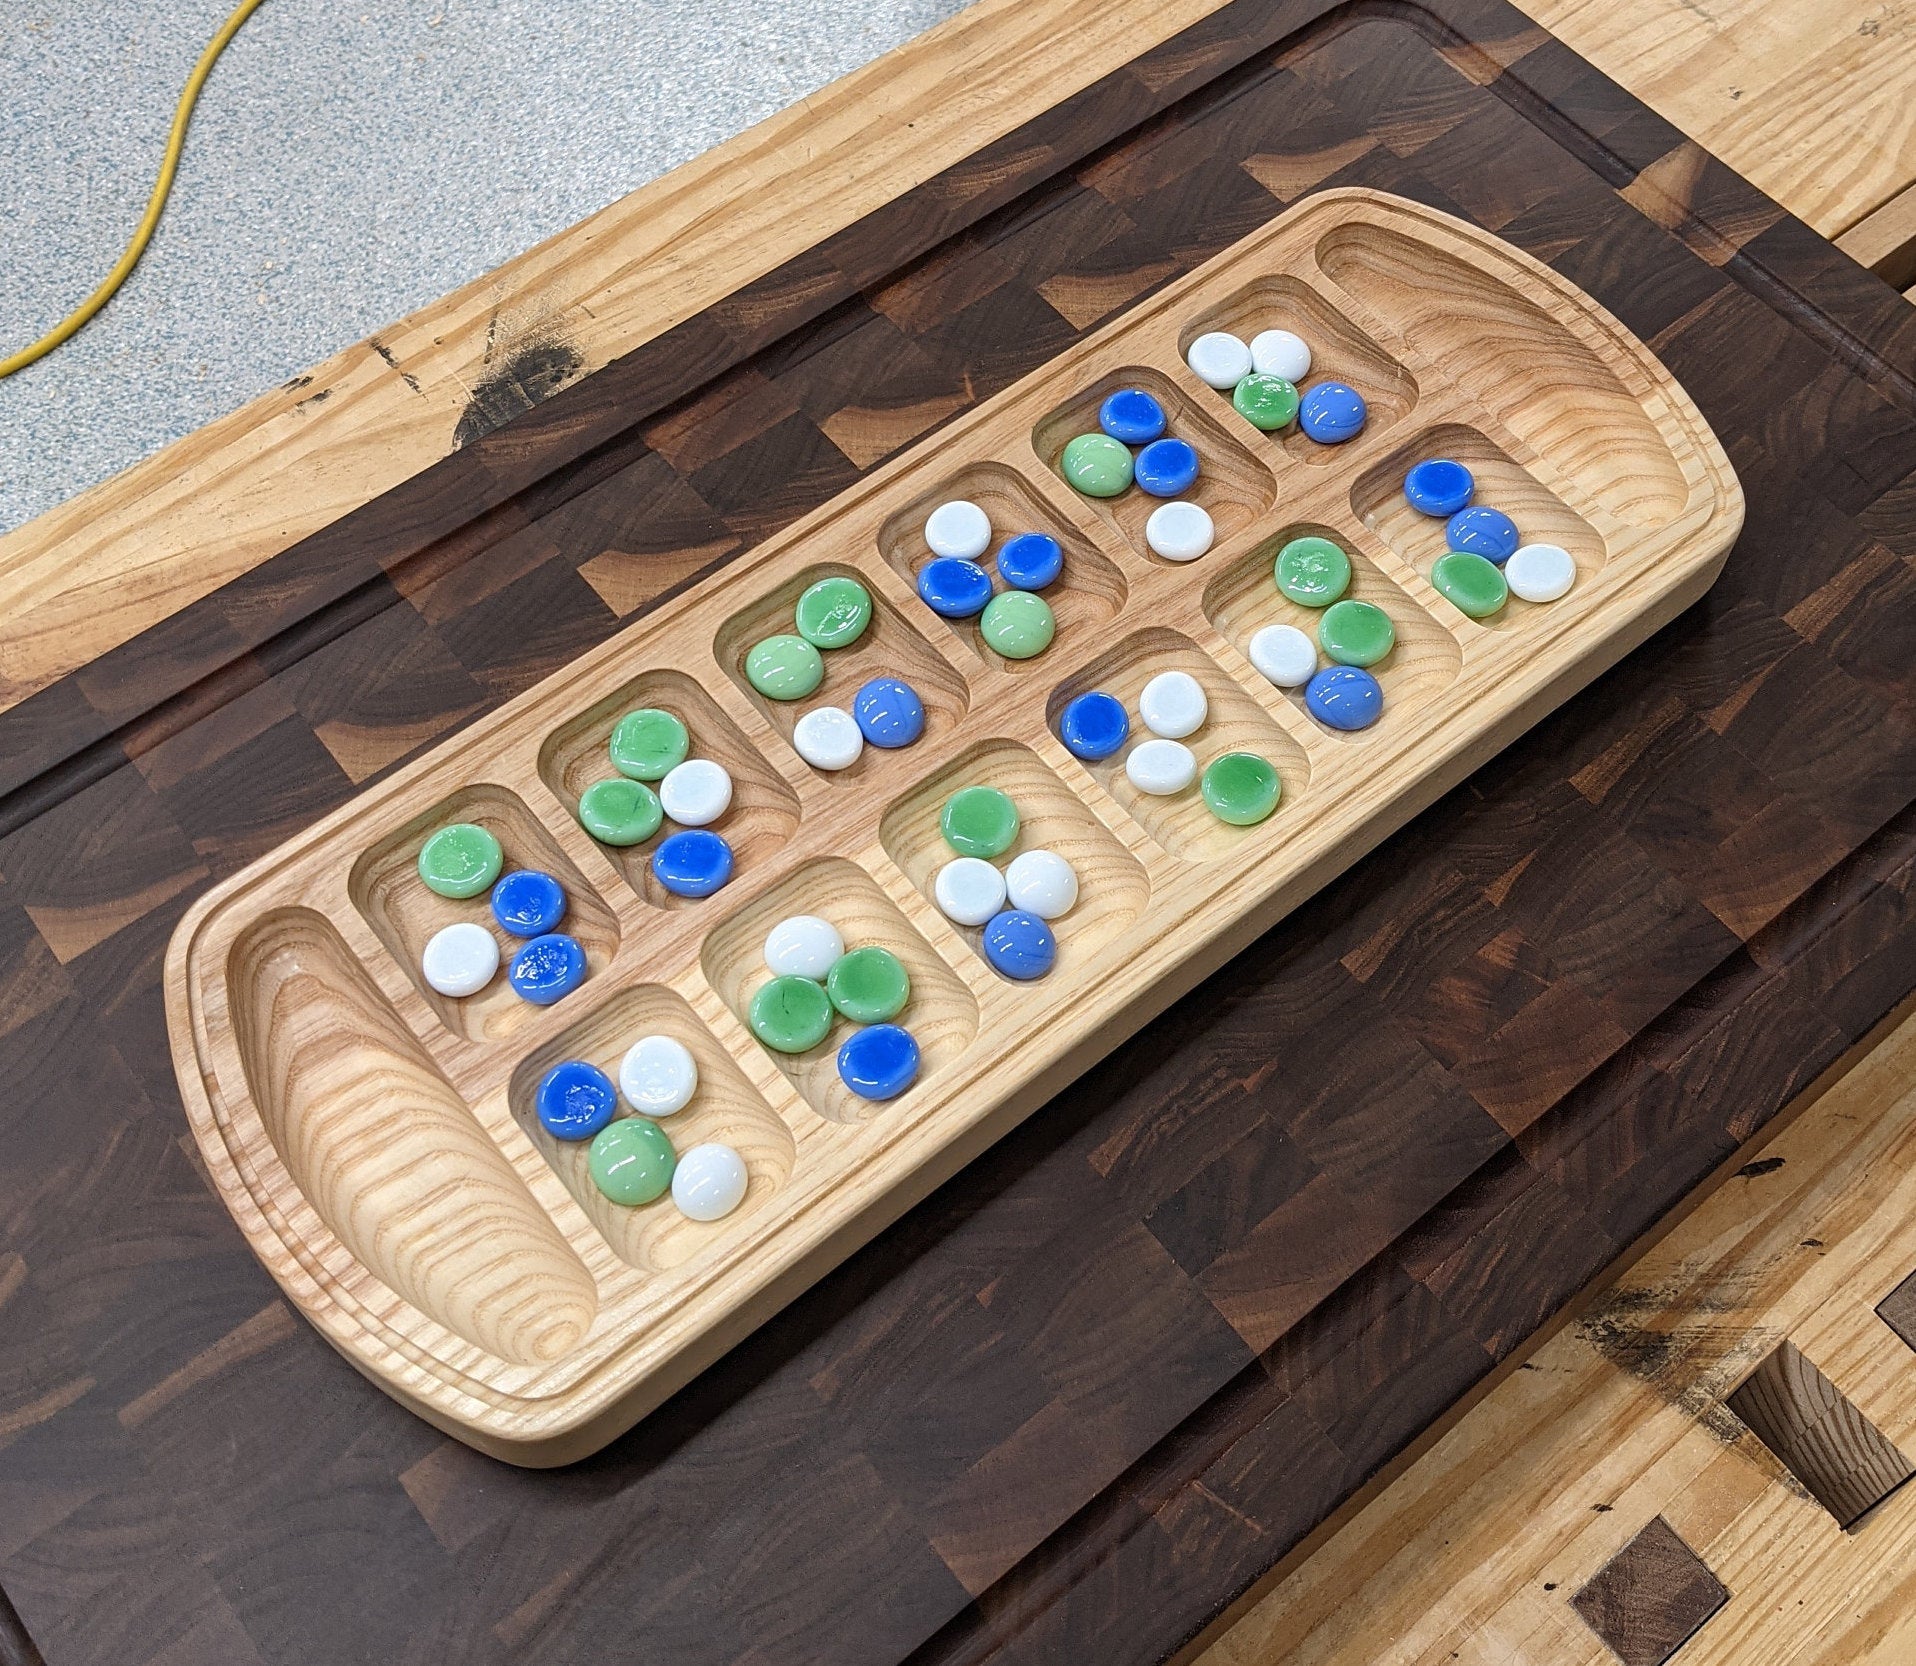 Mancala Board made from Urban Reclaimed Lumber, Stones Included